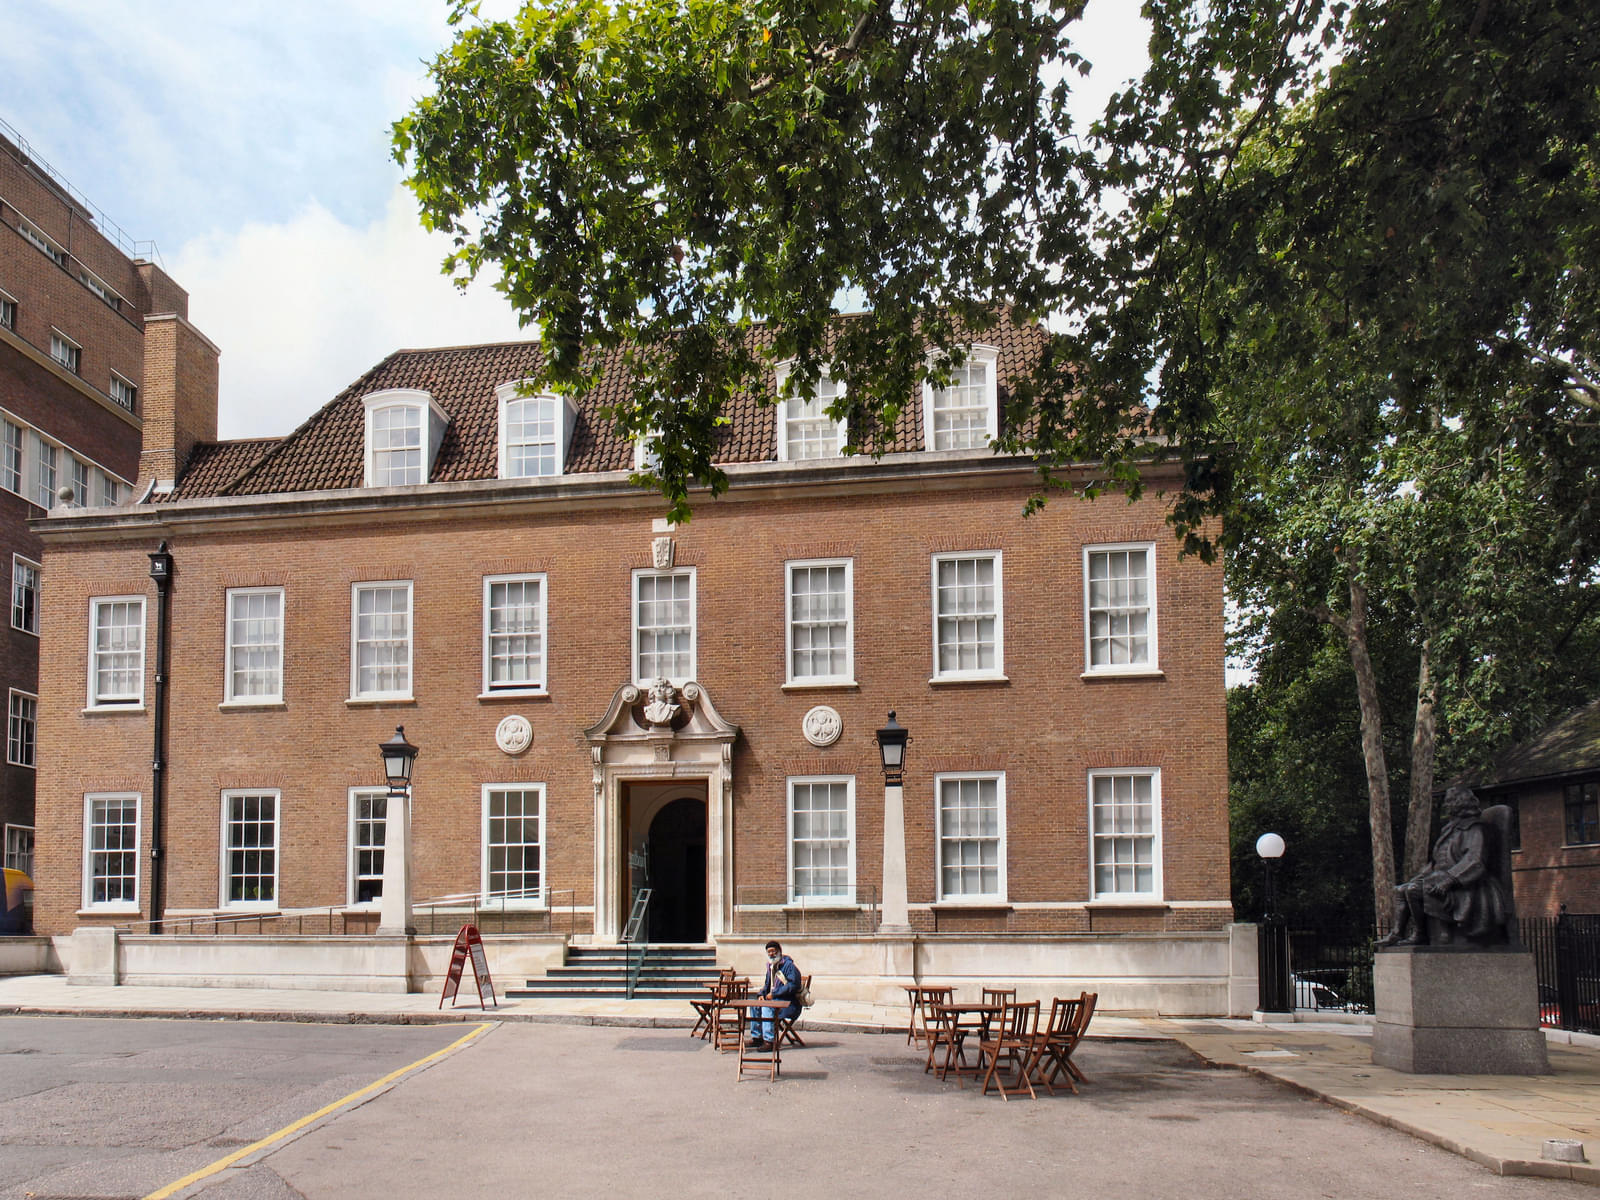 Experience a day at The Foundling Museum in London